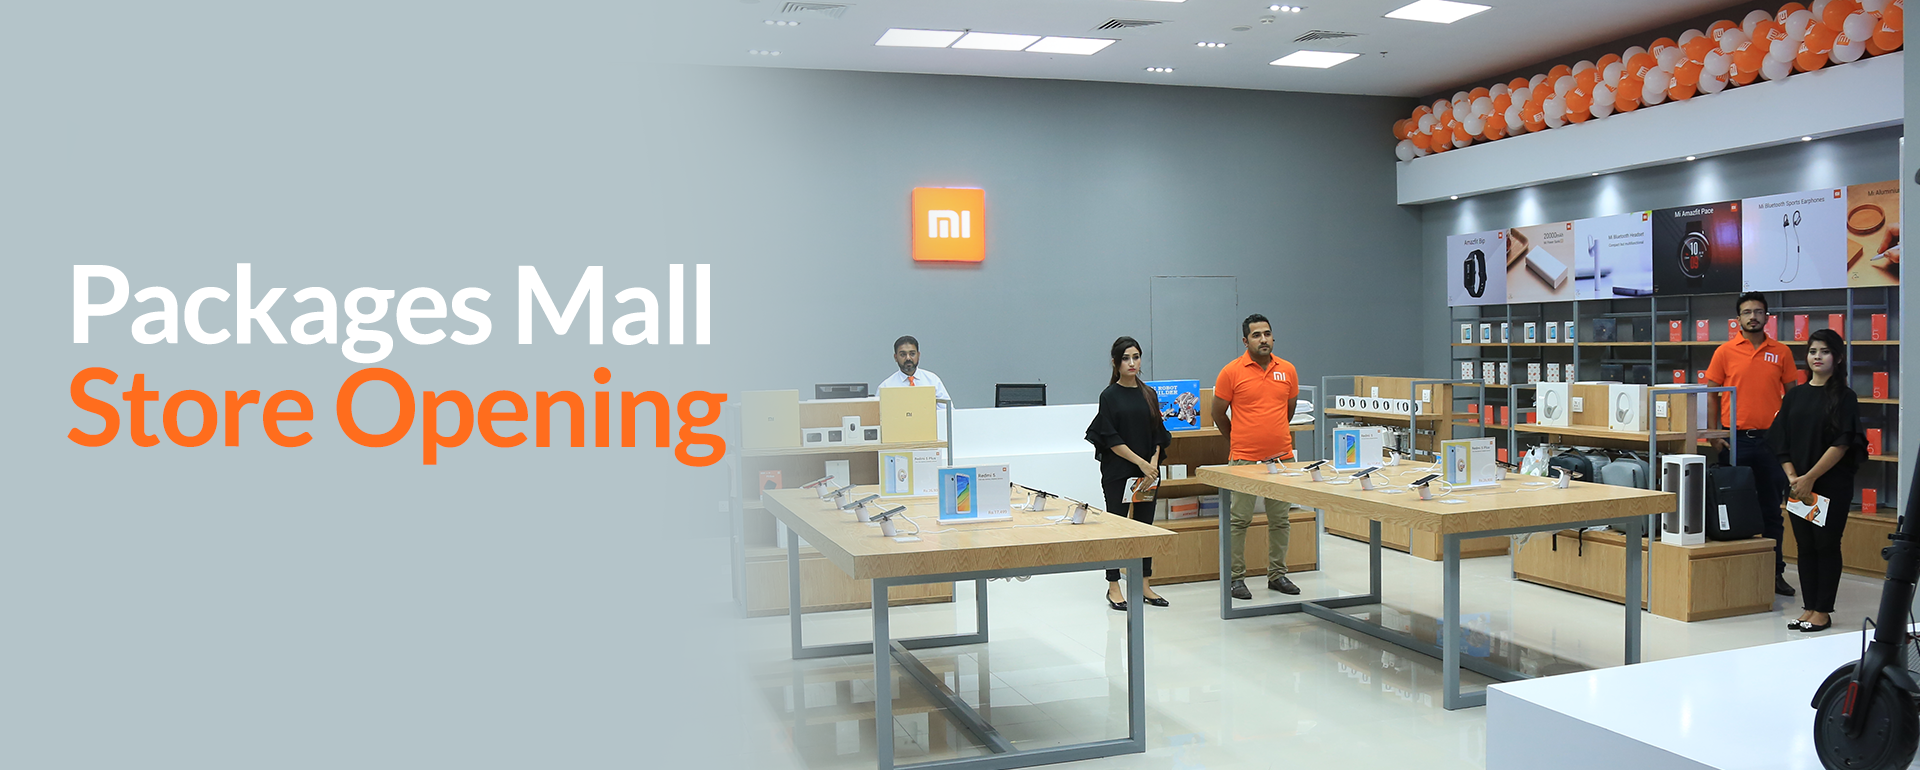 Packages Mall Store Opening